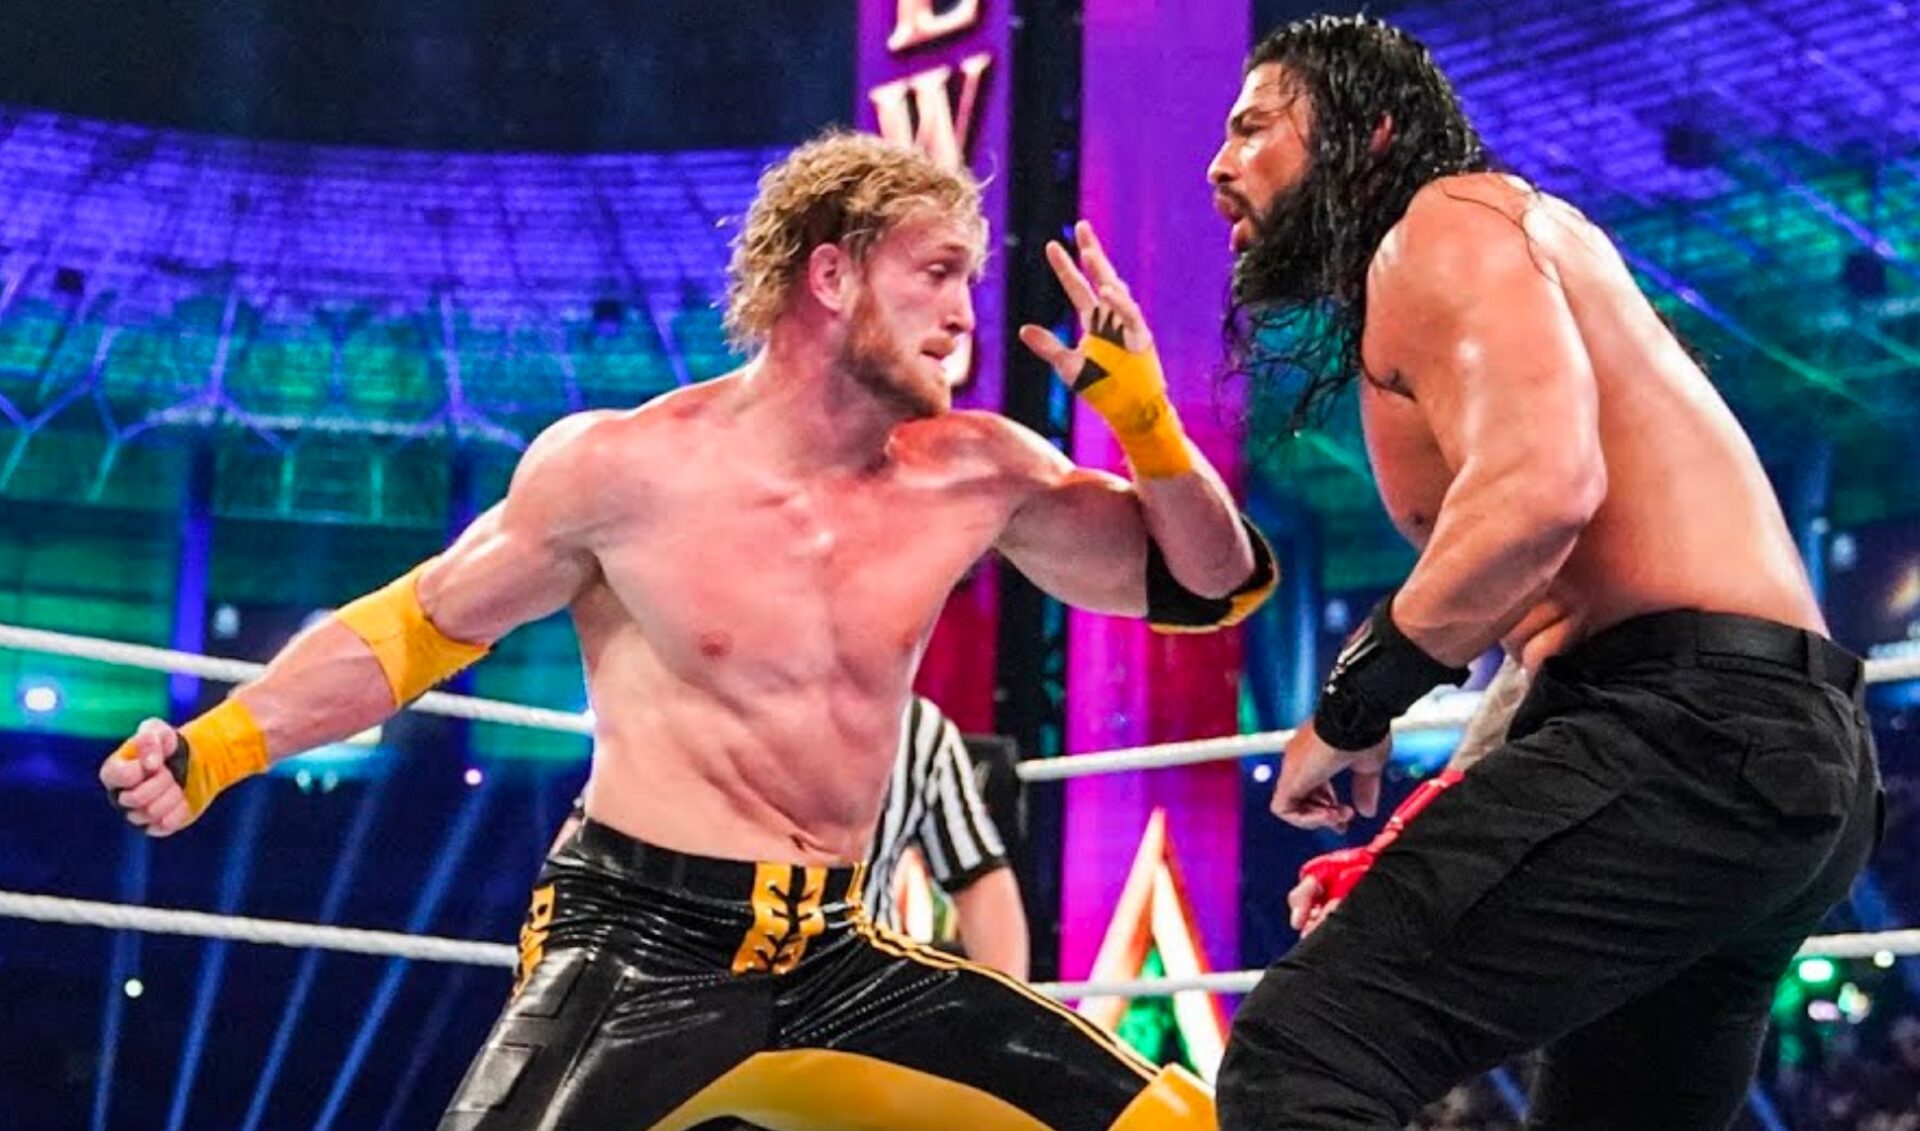 Logan Paul has renewed his WWE contract. Is a UFC move coming next?